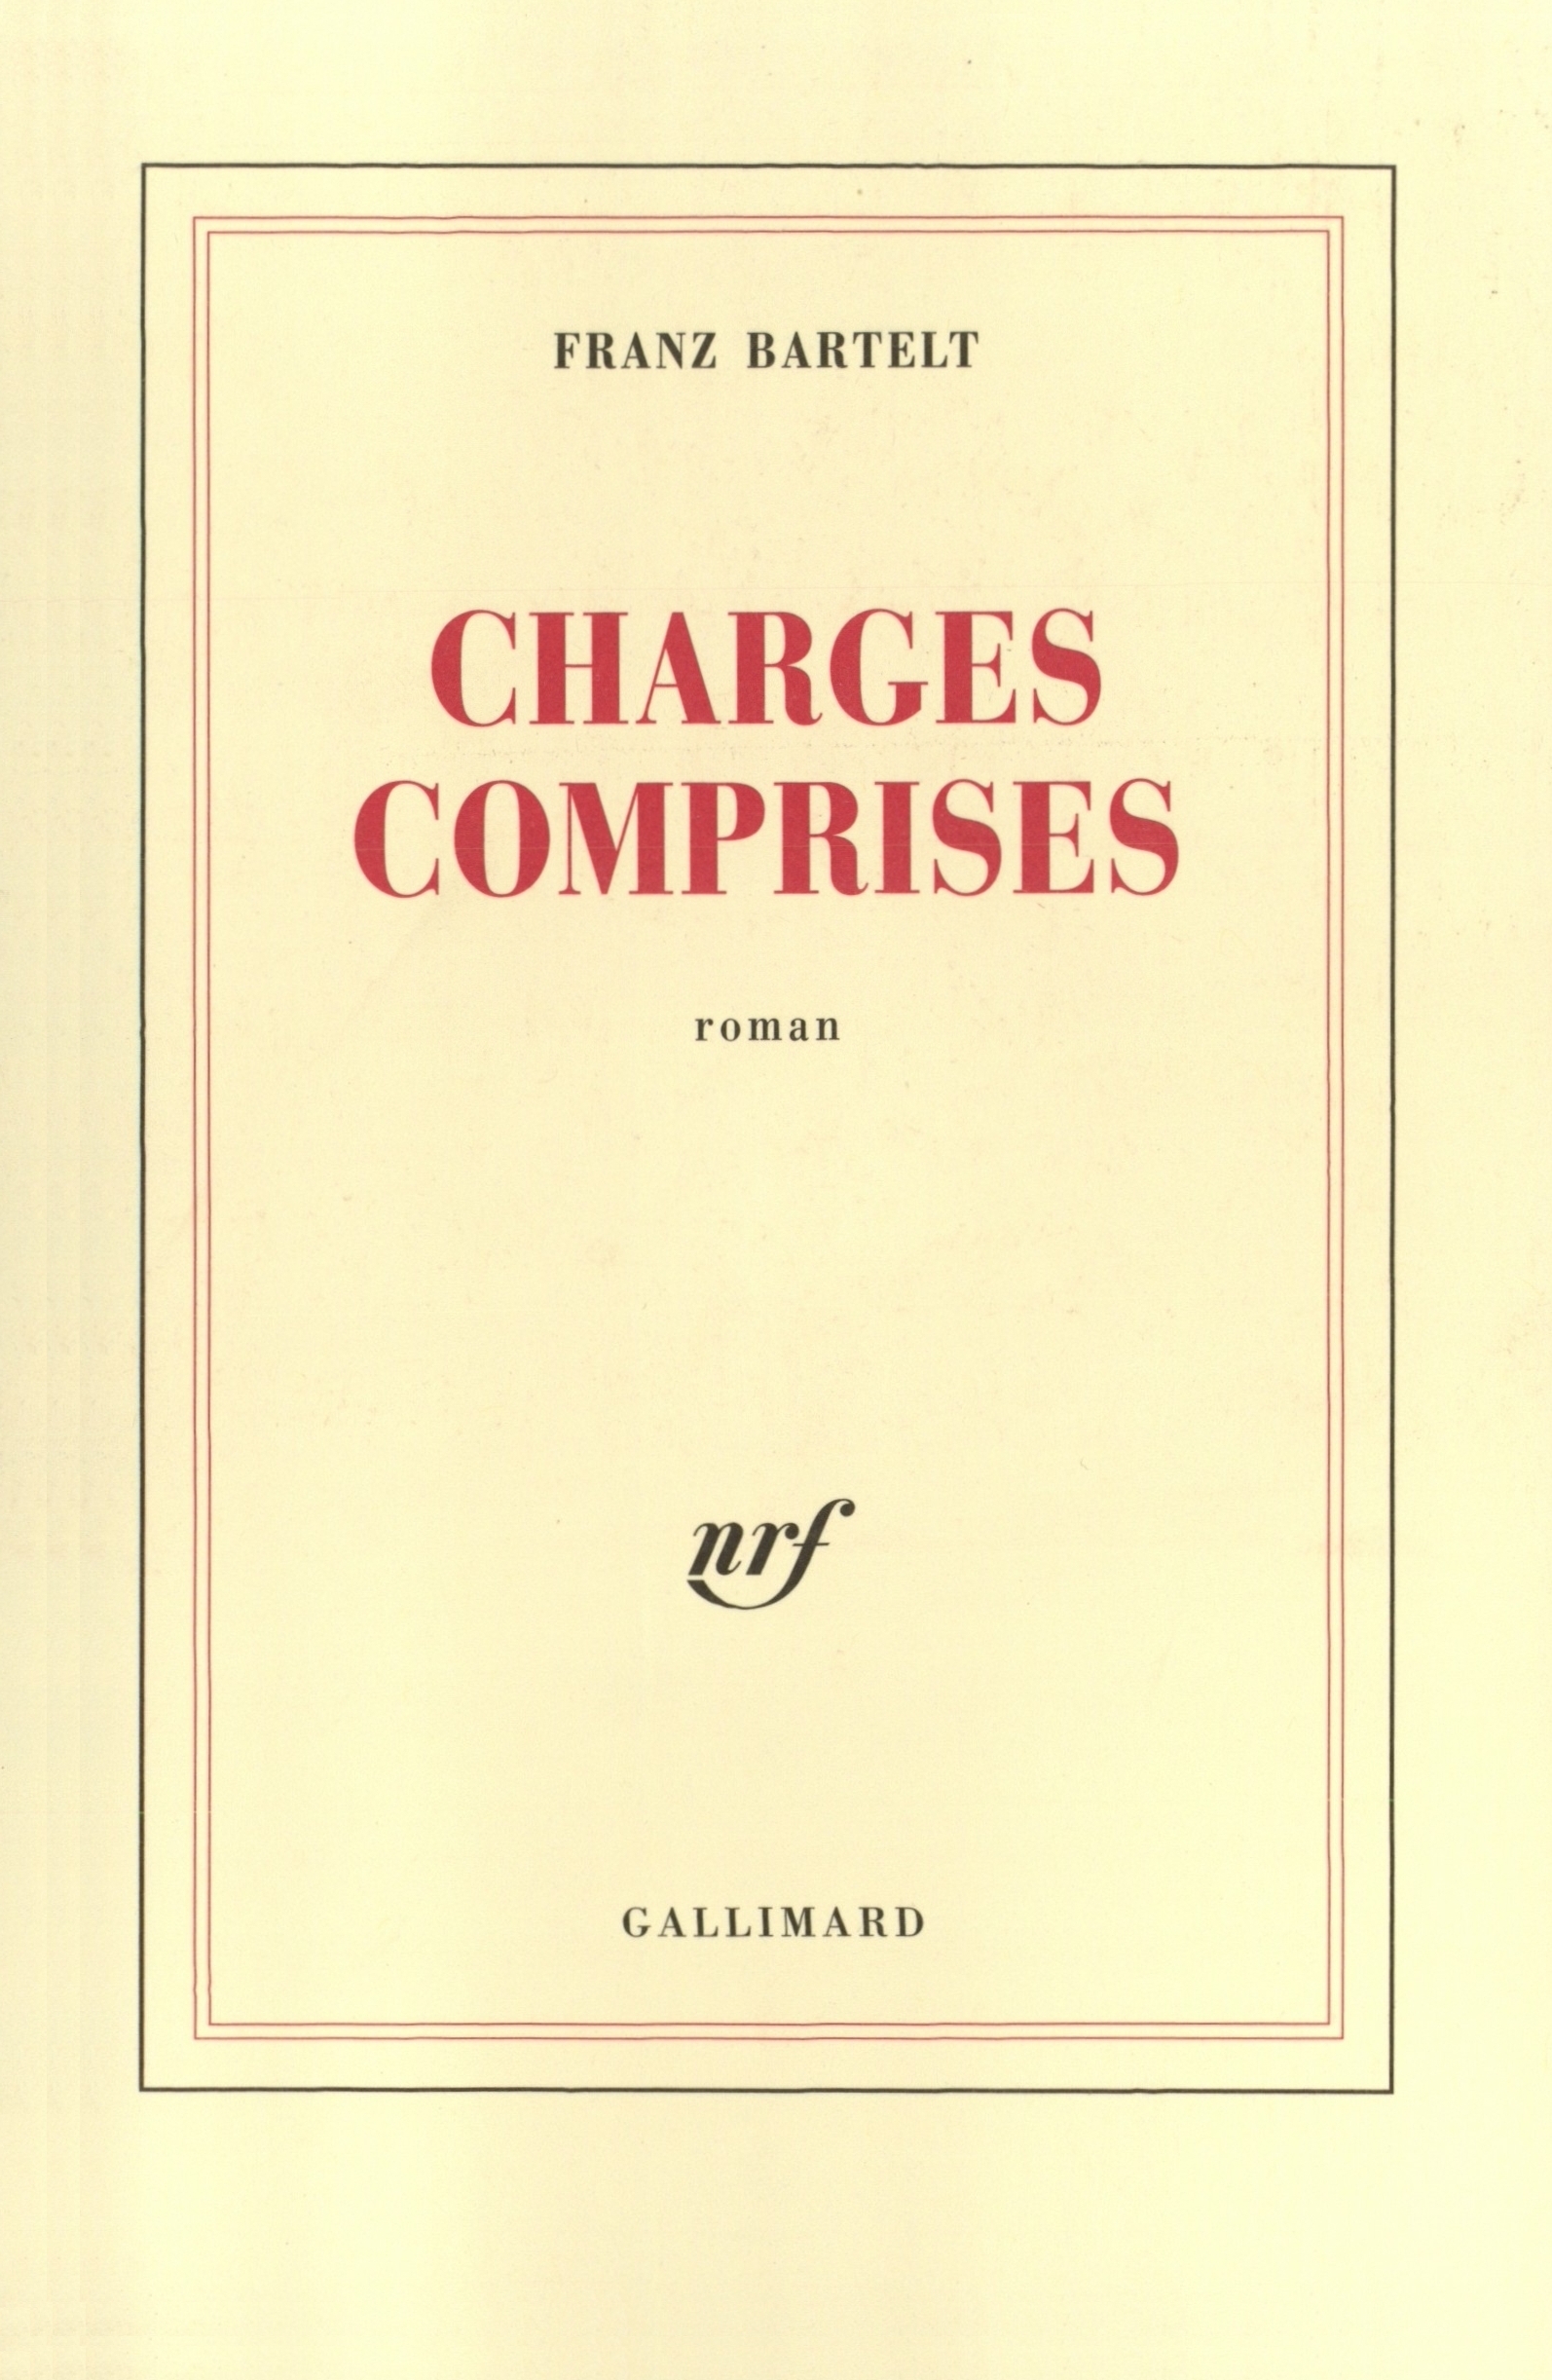 Charges comprises (9782070718153-front-cover)